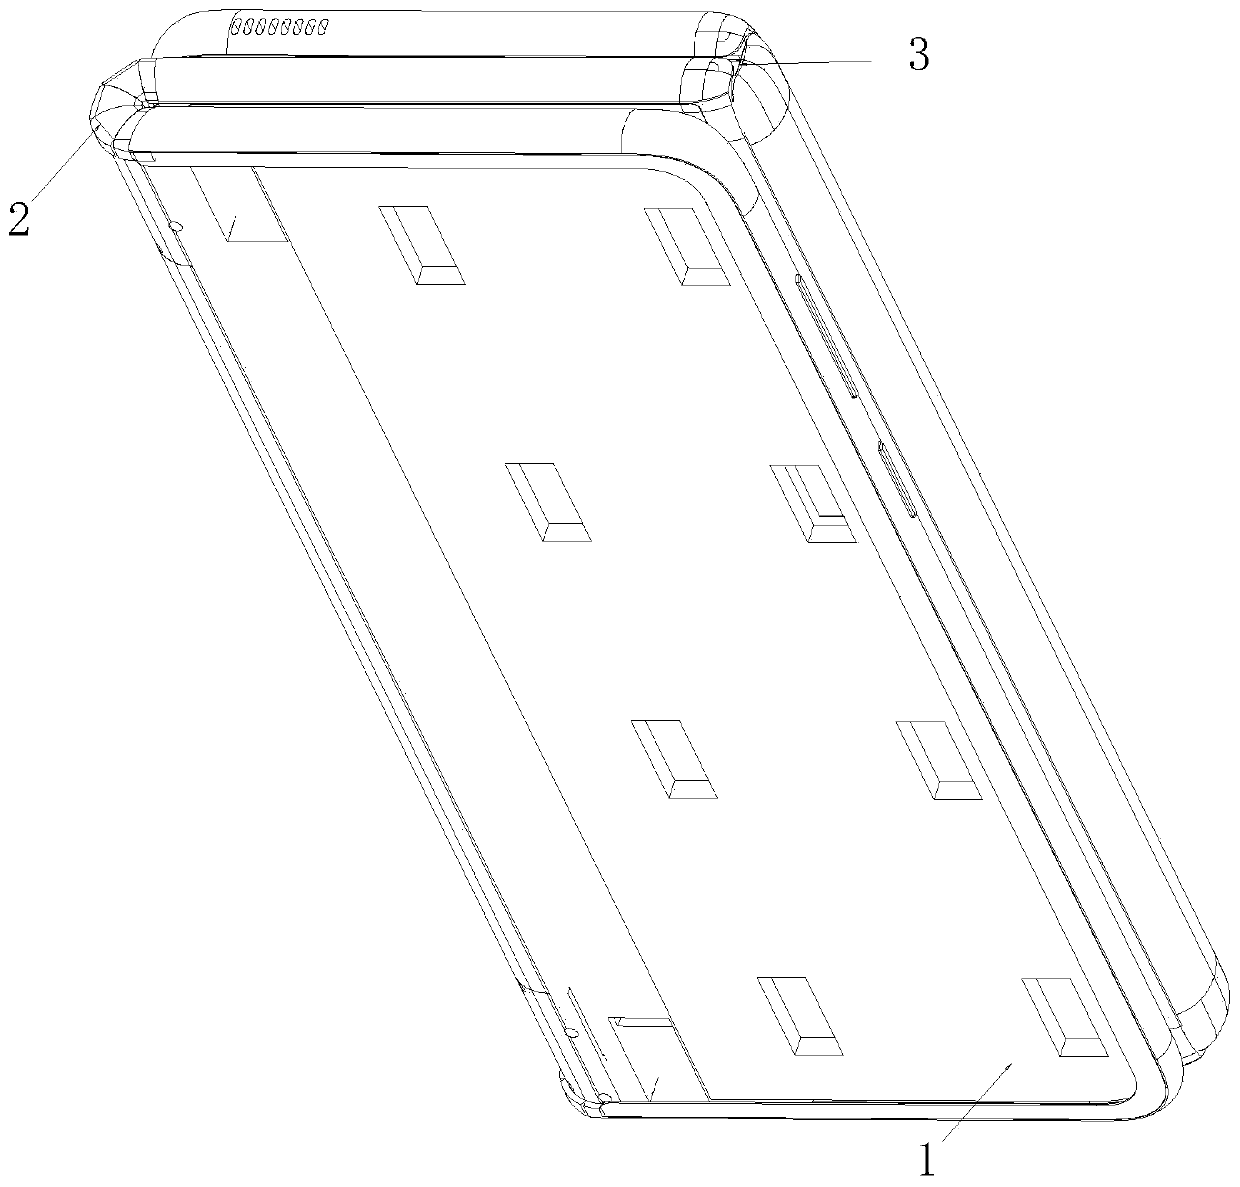 Synchronous rotating mechanism for inward and outward folding of flexible screen